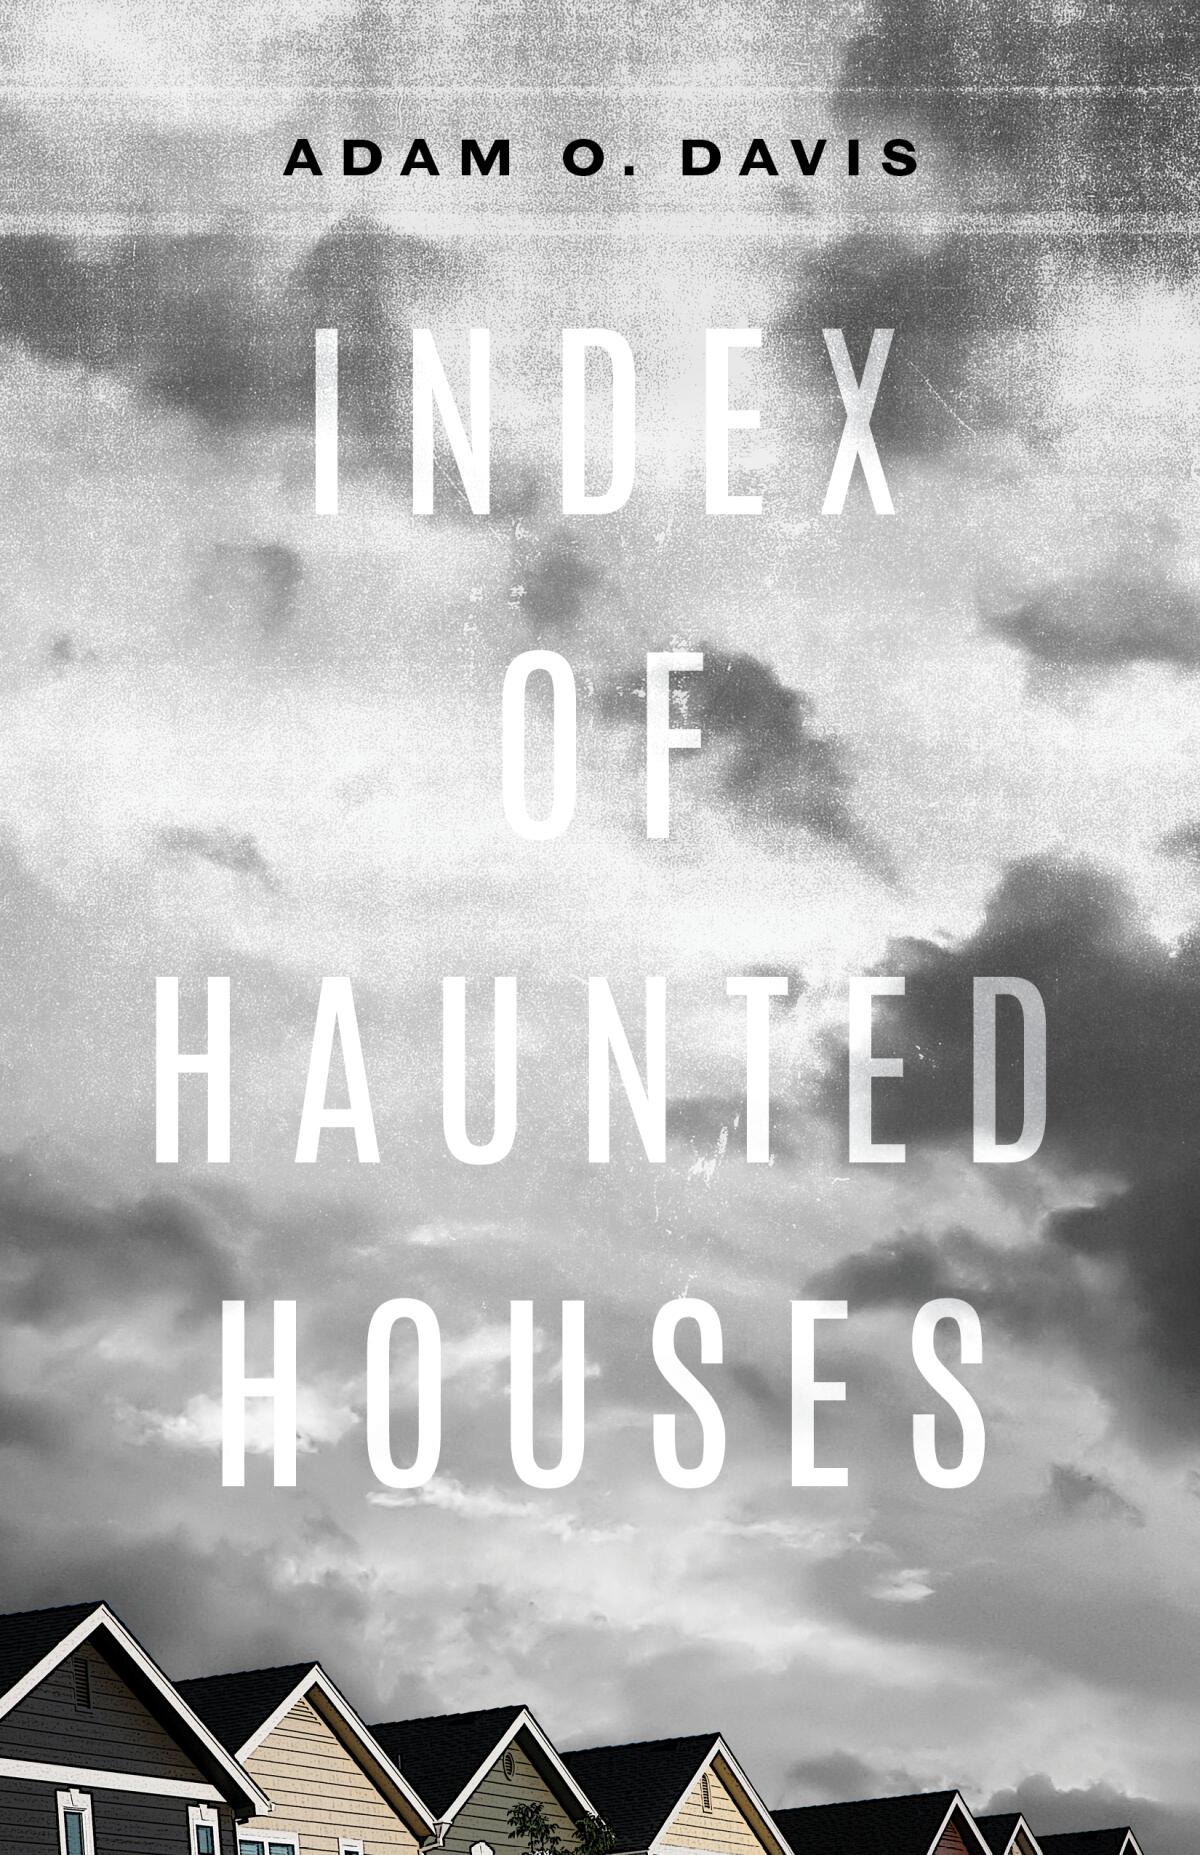 "Index of Haunted Houses" is inspired by ghost stories and contains photos taken by author Adam Davis.